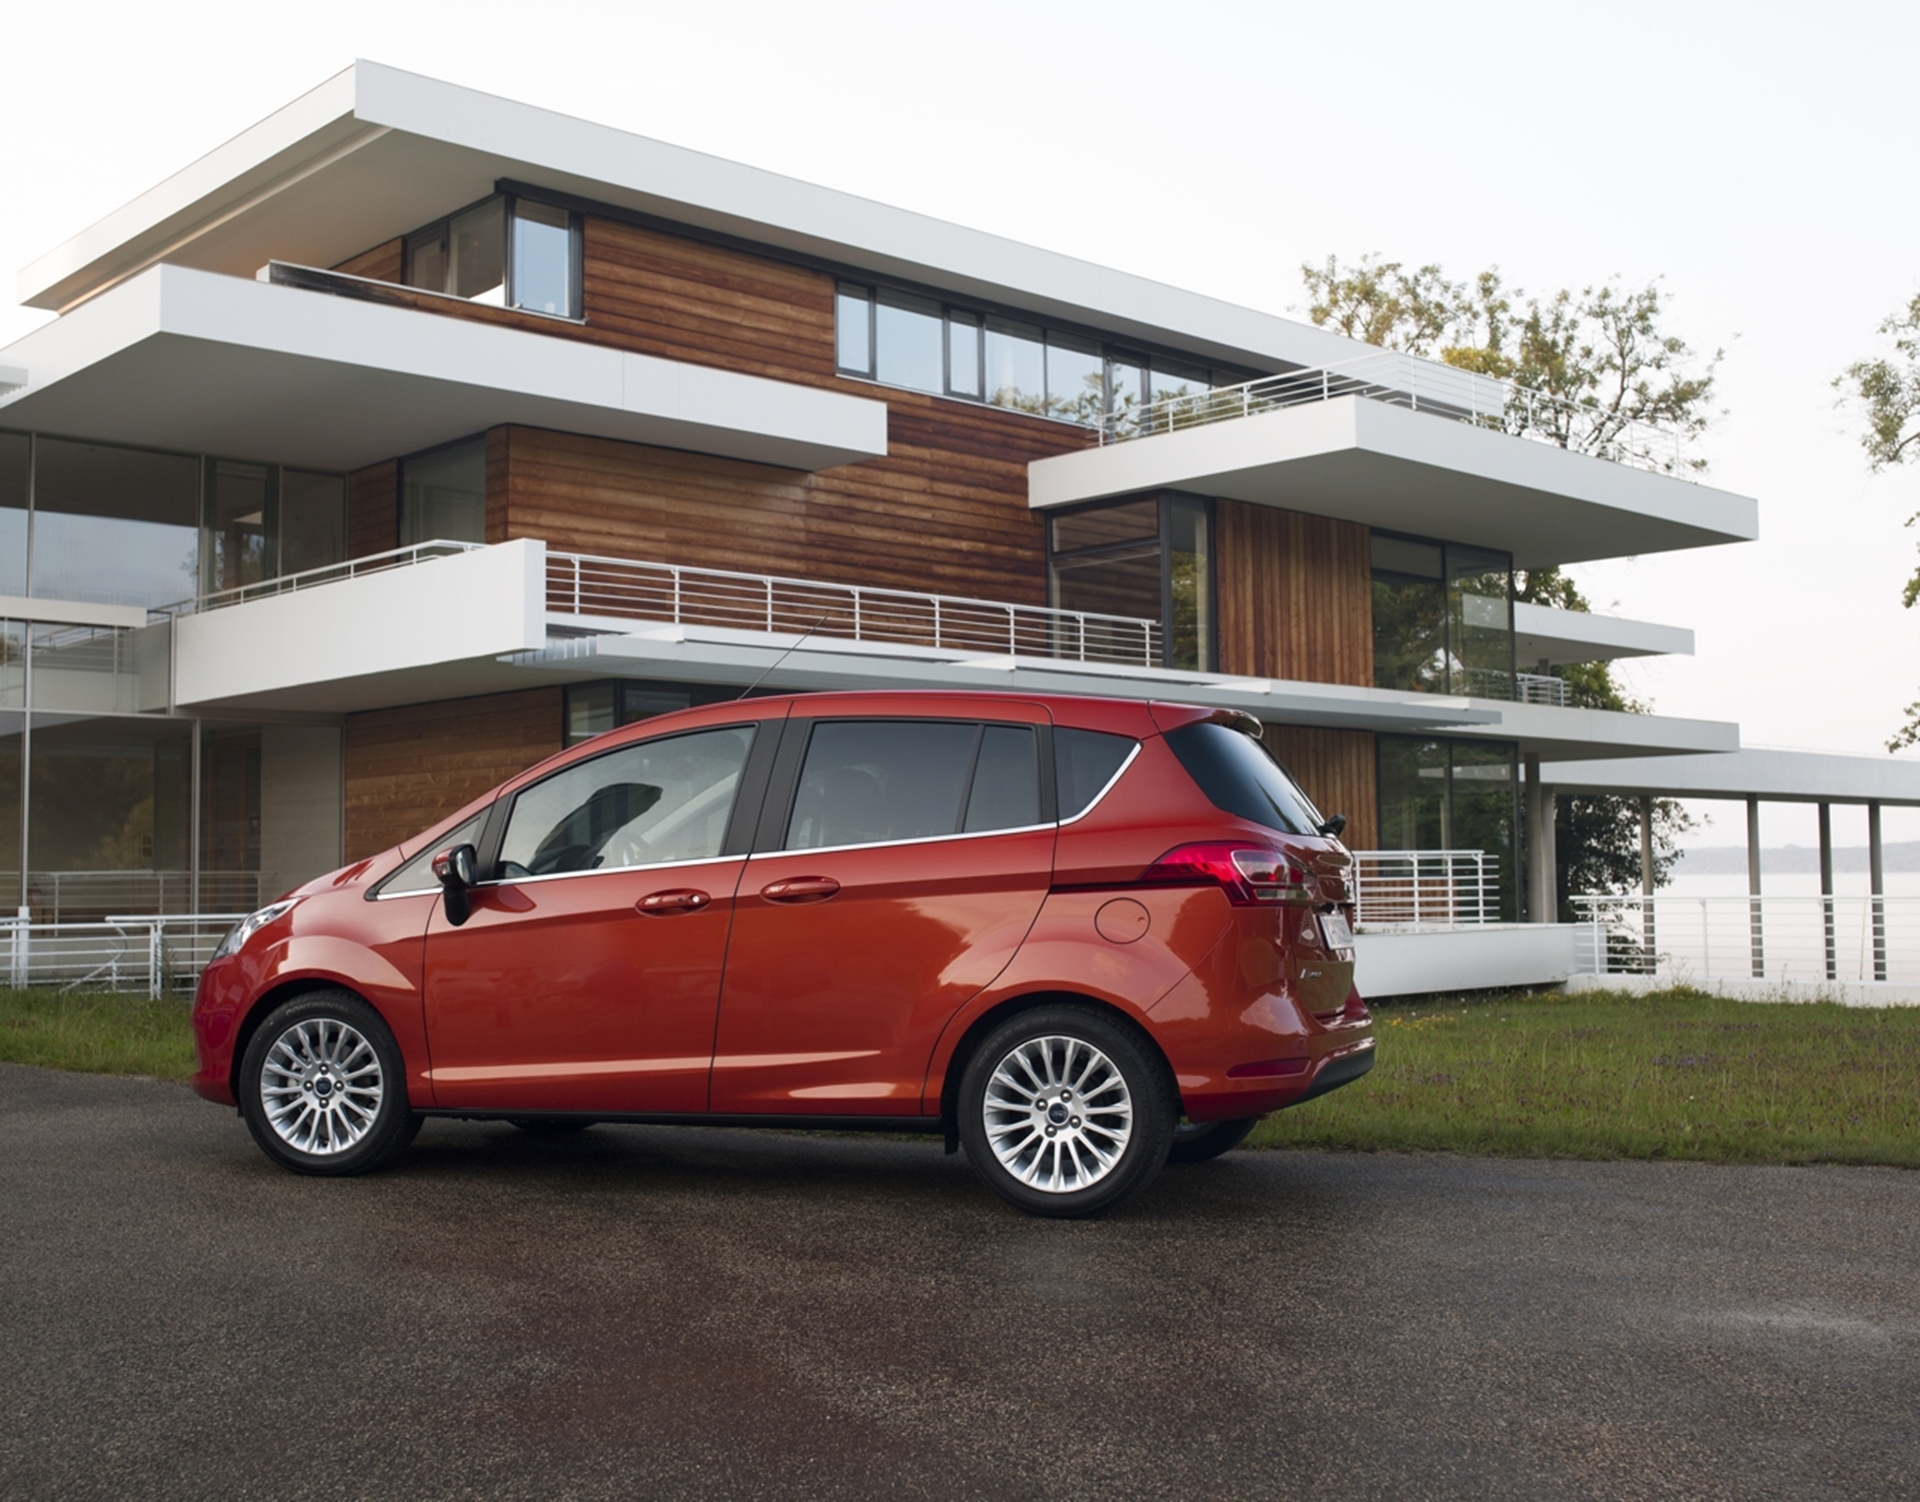 All-New Ford B-MAX Delivers Dynamic Design and Superior Driving Quality